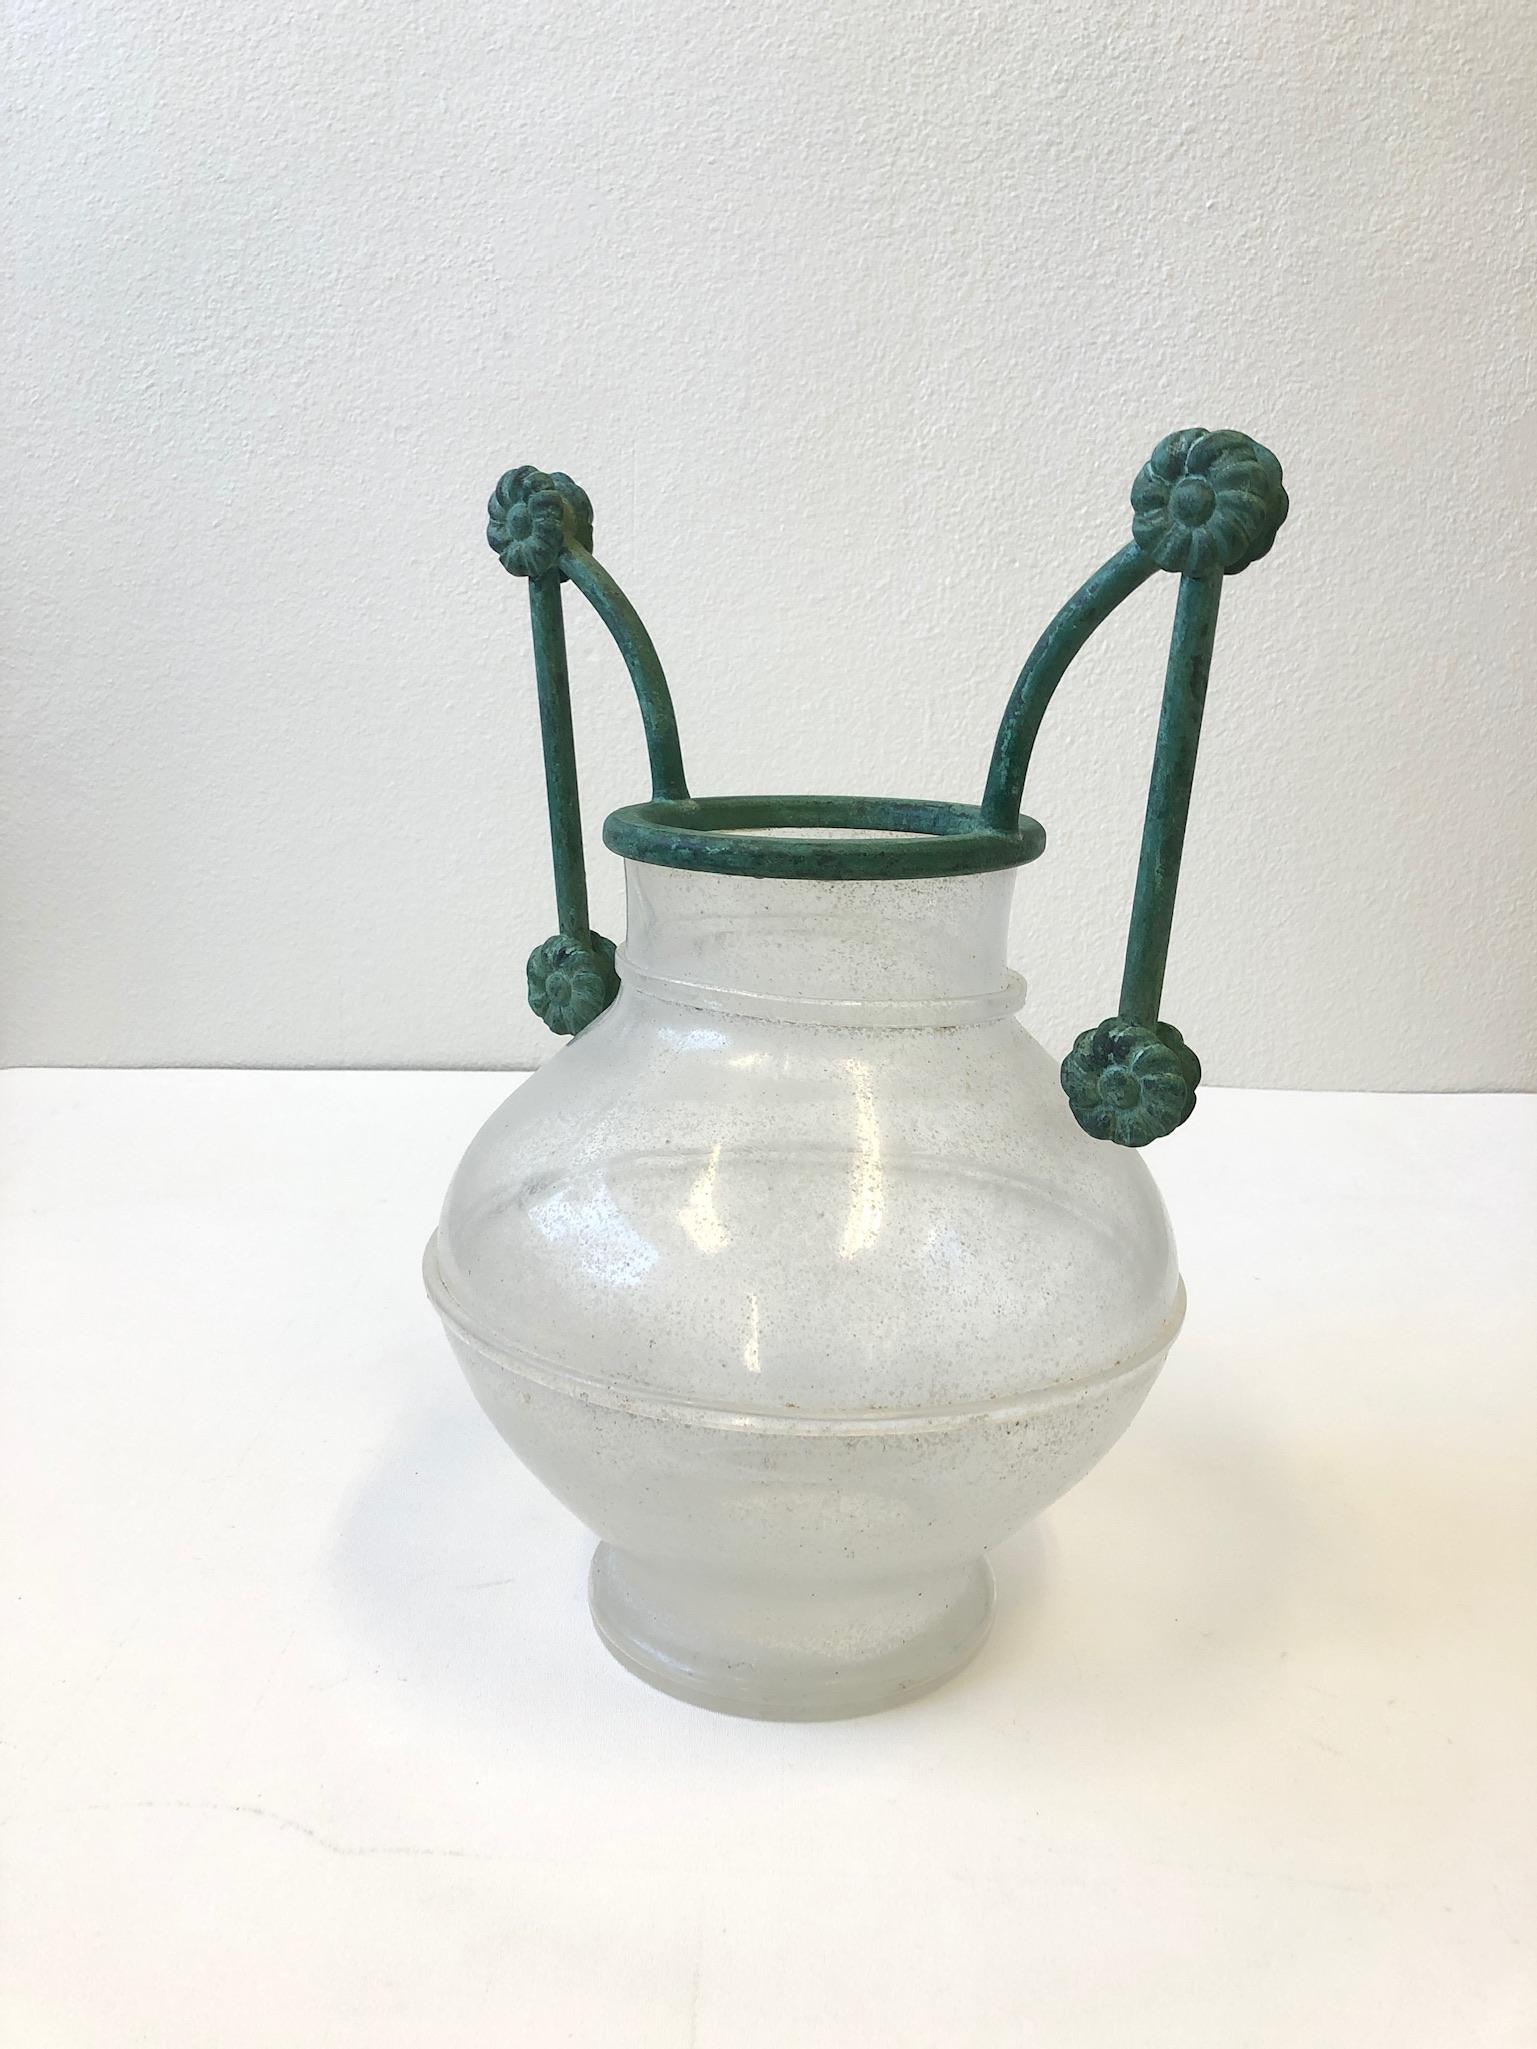 1980s Italian Scavo Murano glass vase with decorative patinated bronze handles.
Part of the Trozzelli designed by Silvia Buscaroli for Seguso Vetri d’Arte.
Measurements: 17.5” high, 12.75” wide and 12” deep.